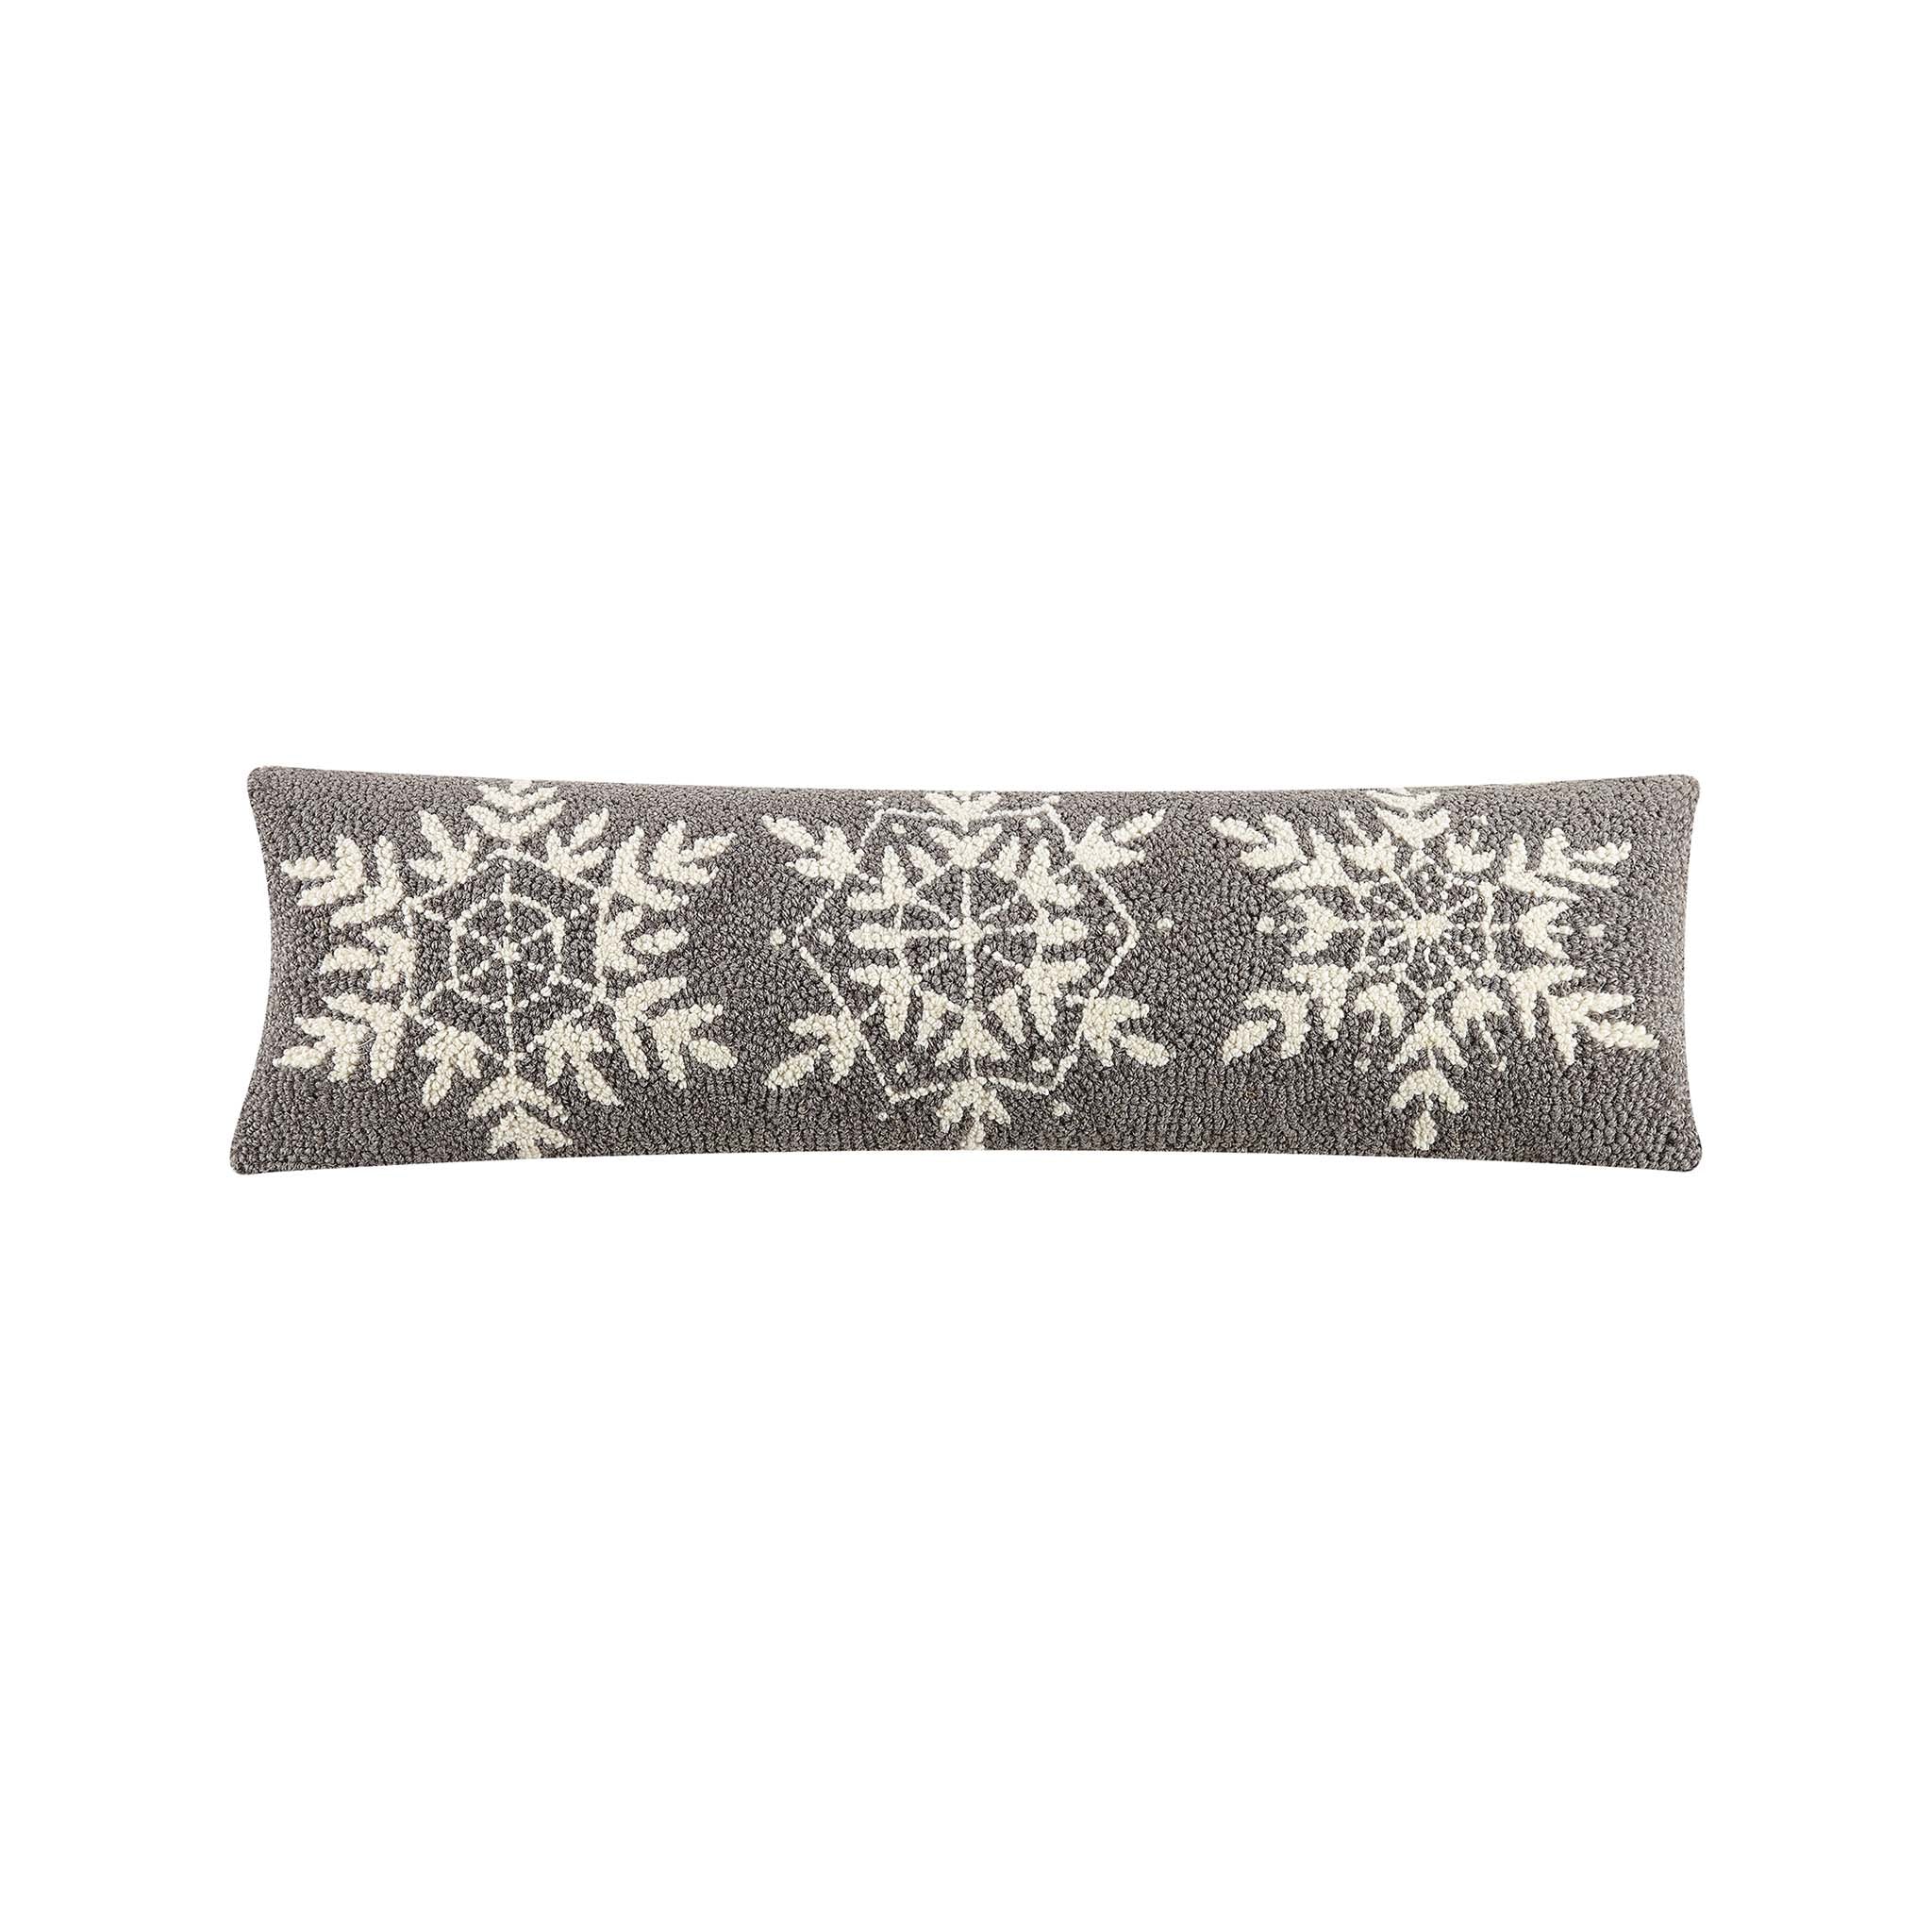 Simple Celebrations Snowflake Oblong Hooked Pillow